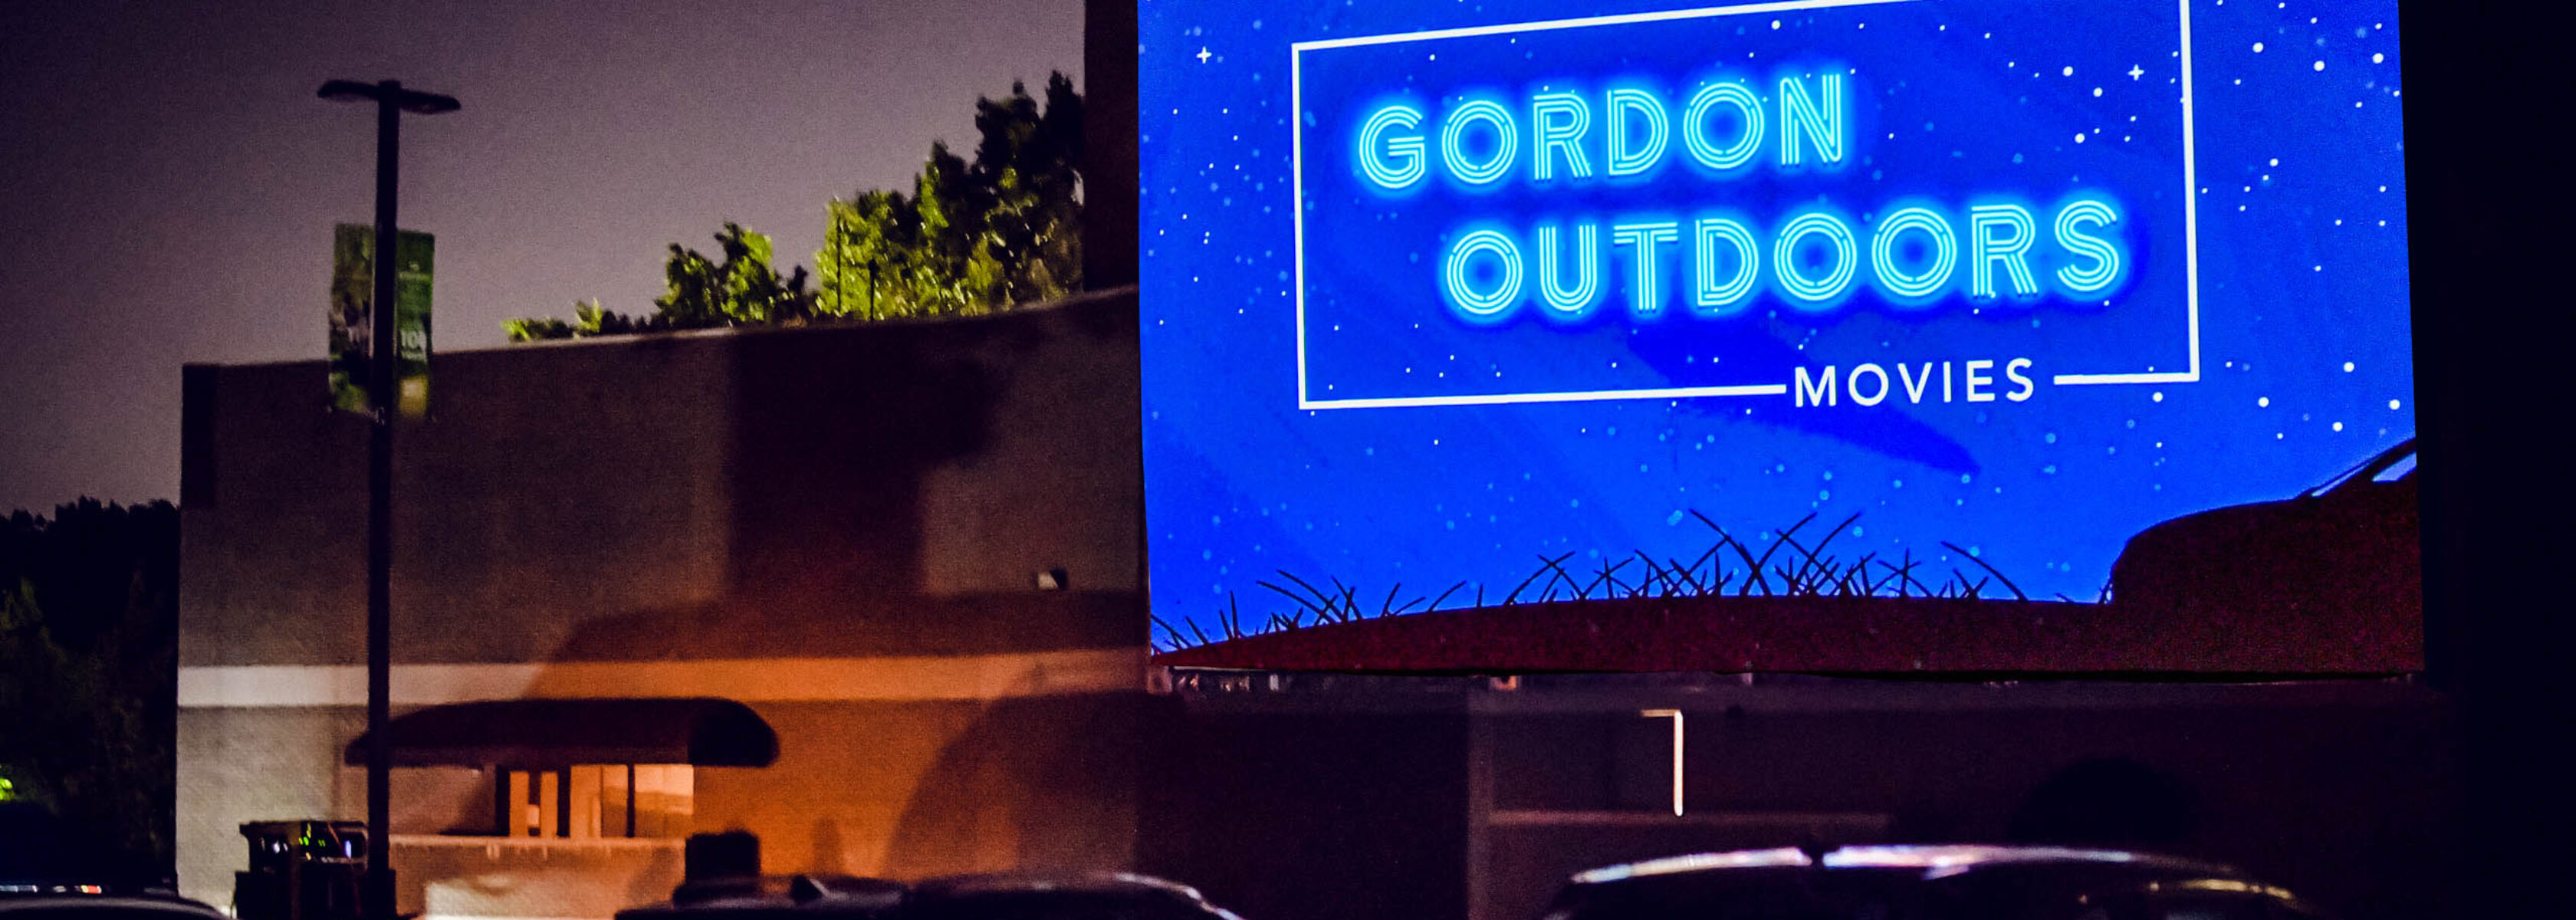 Outdoor movie screen that says Gordon Outdoors with cars in front.